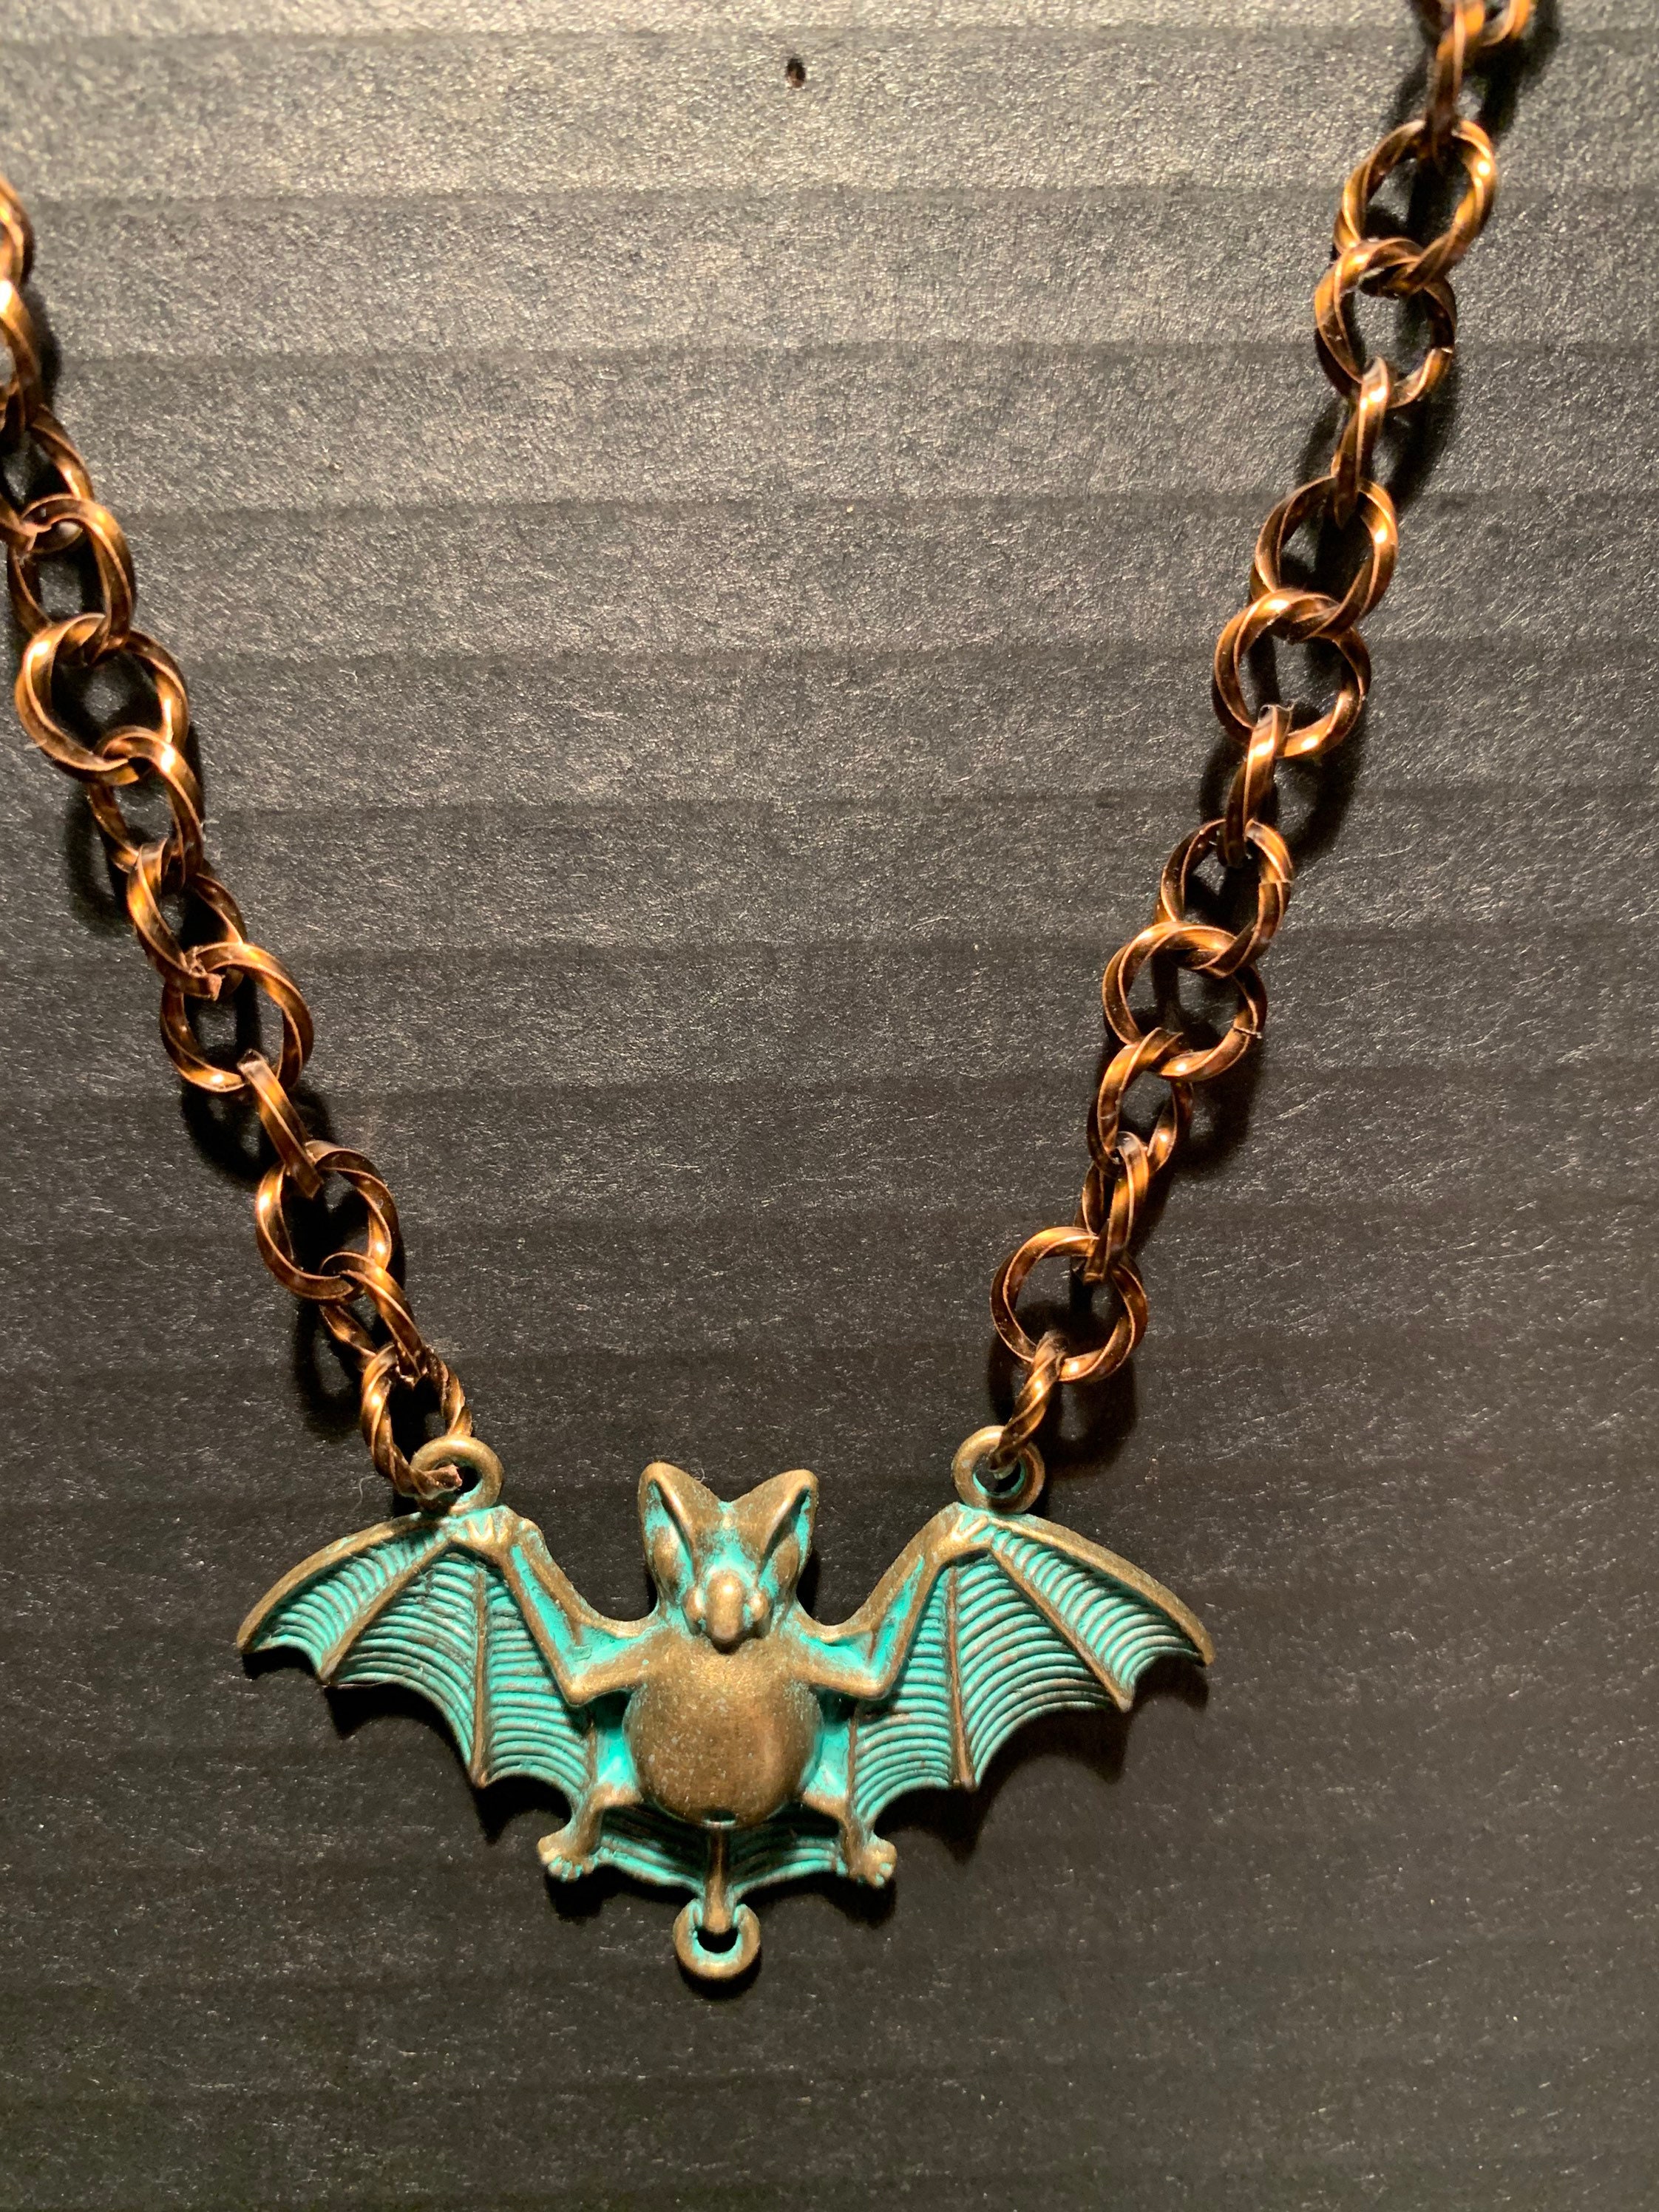 Twisted Metal Bat necklace